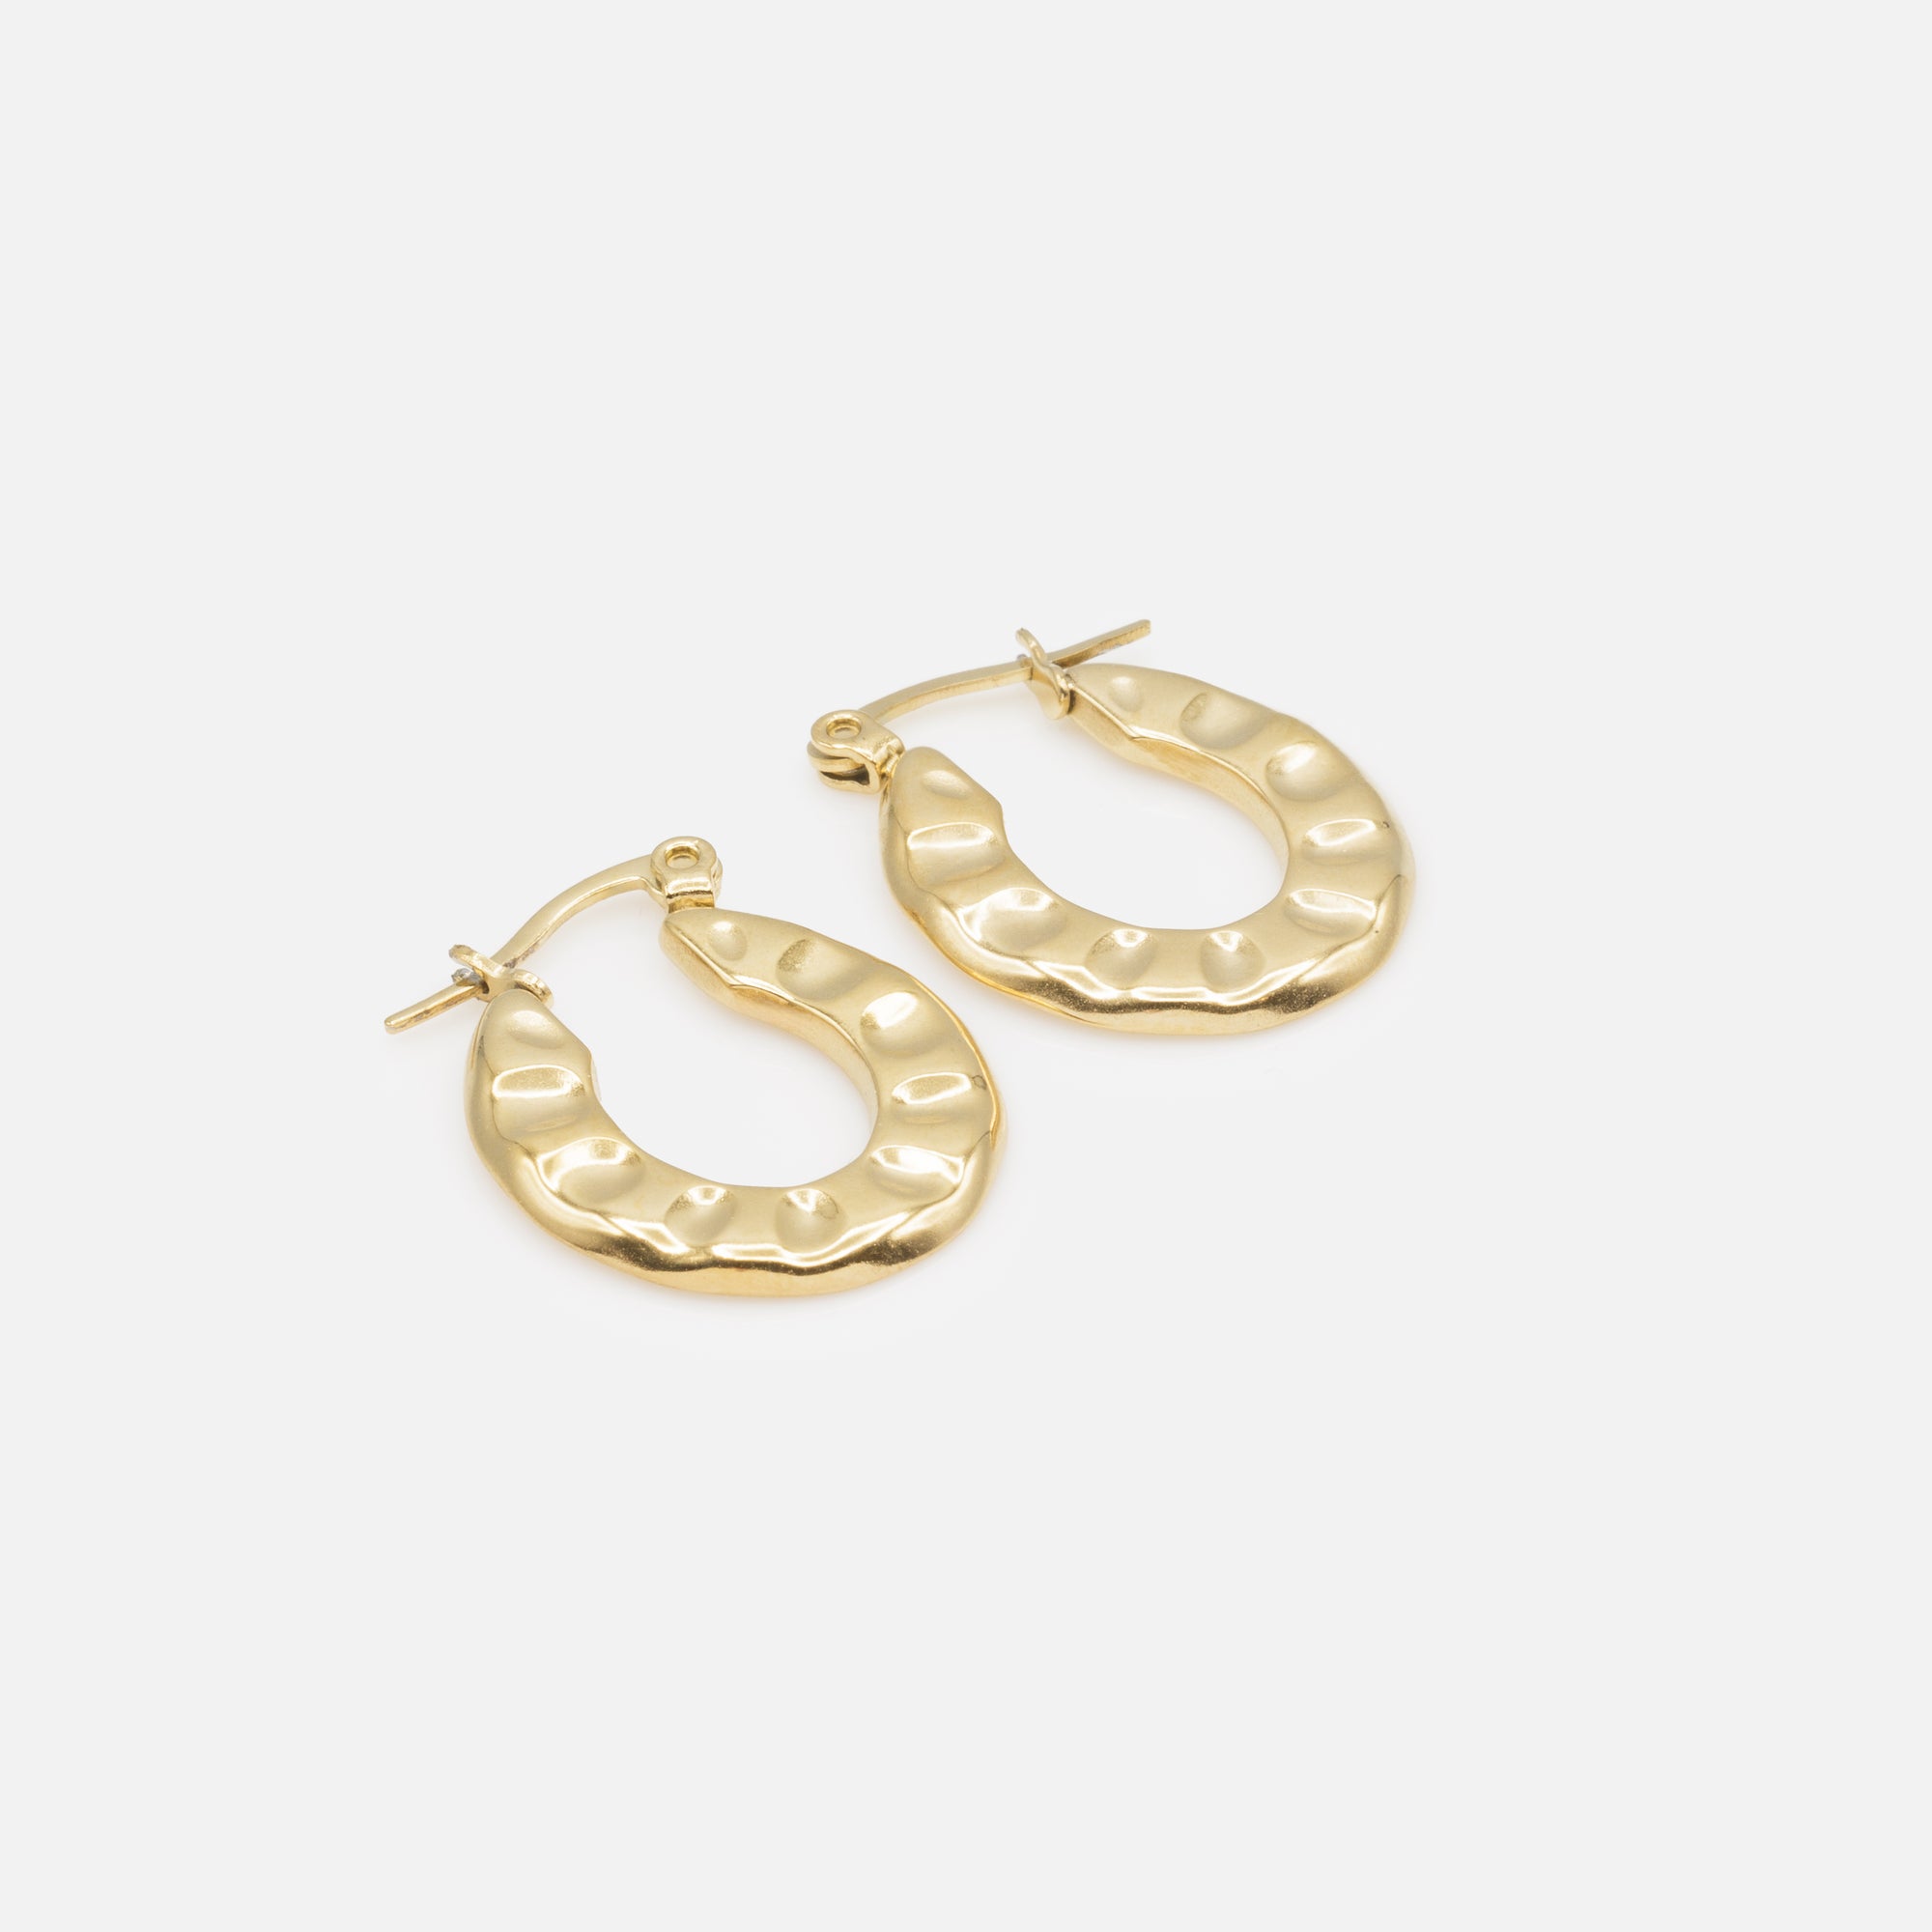 Gold hoop earrings with stainless steel hollows